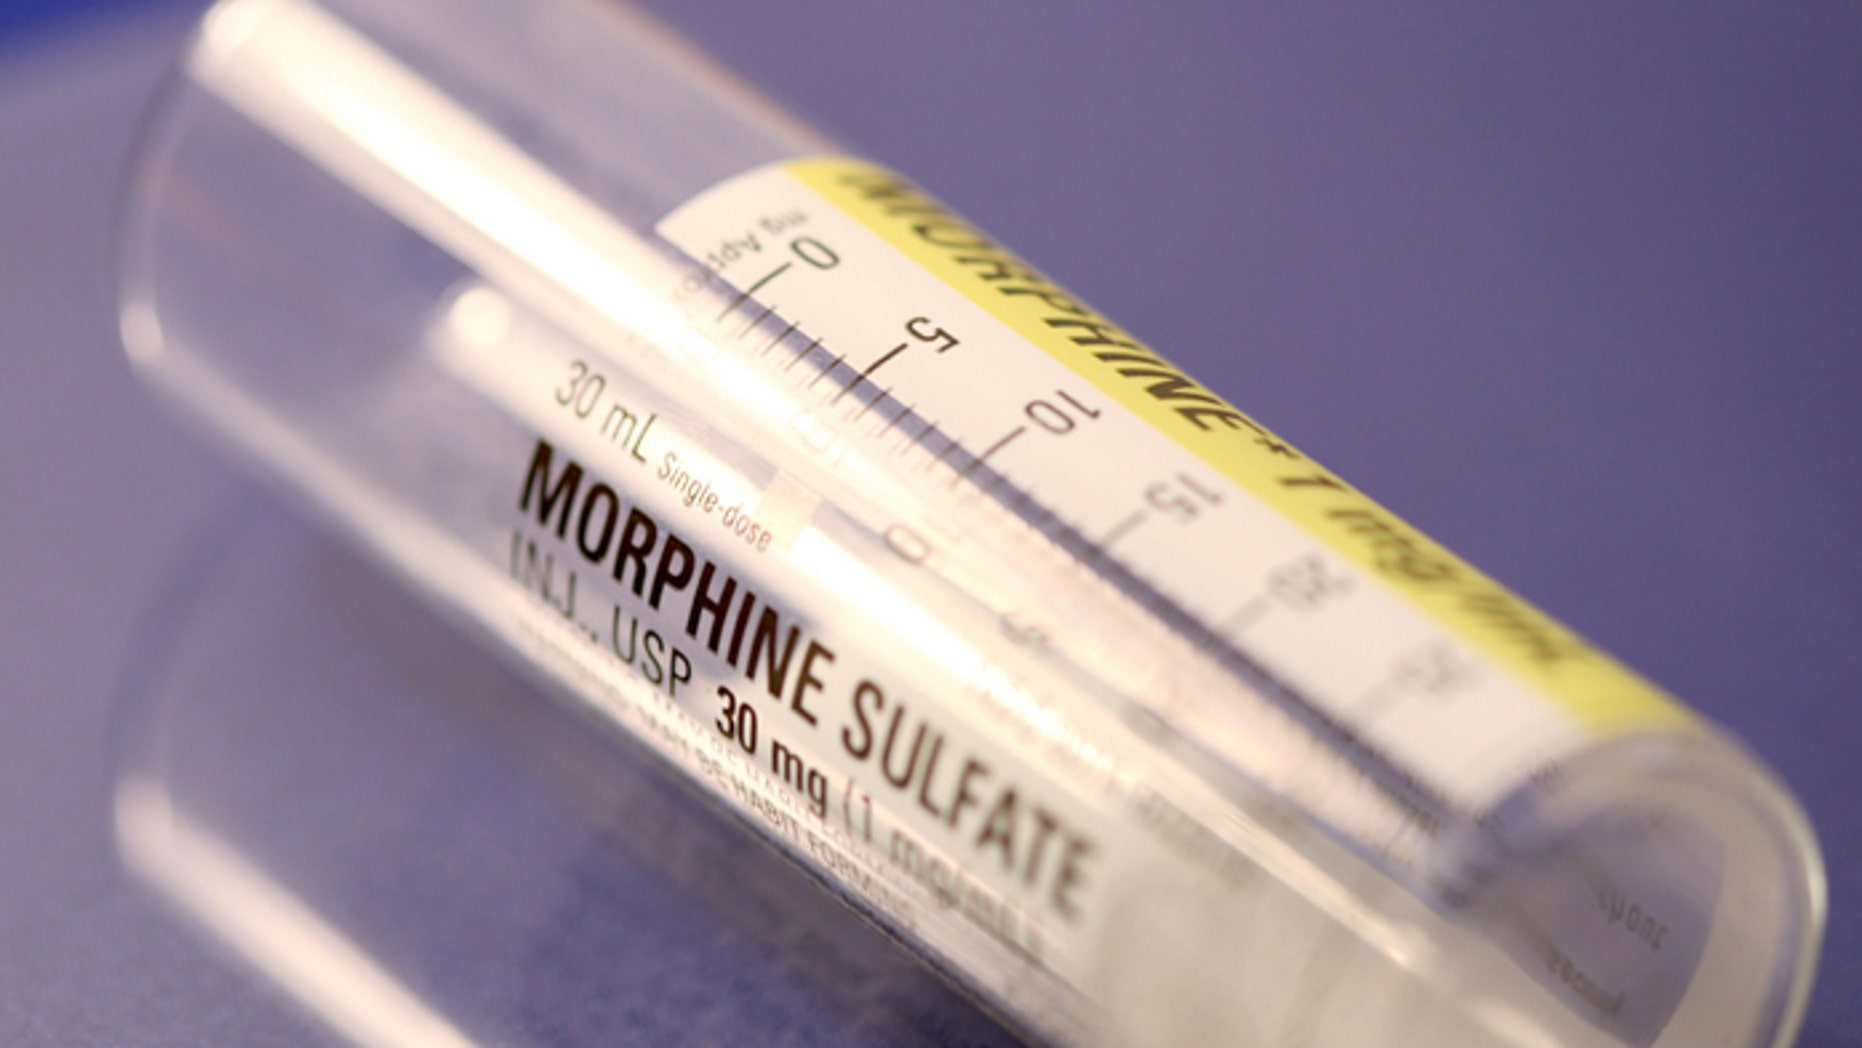 does giving someone morphine hasten death